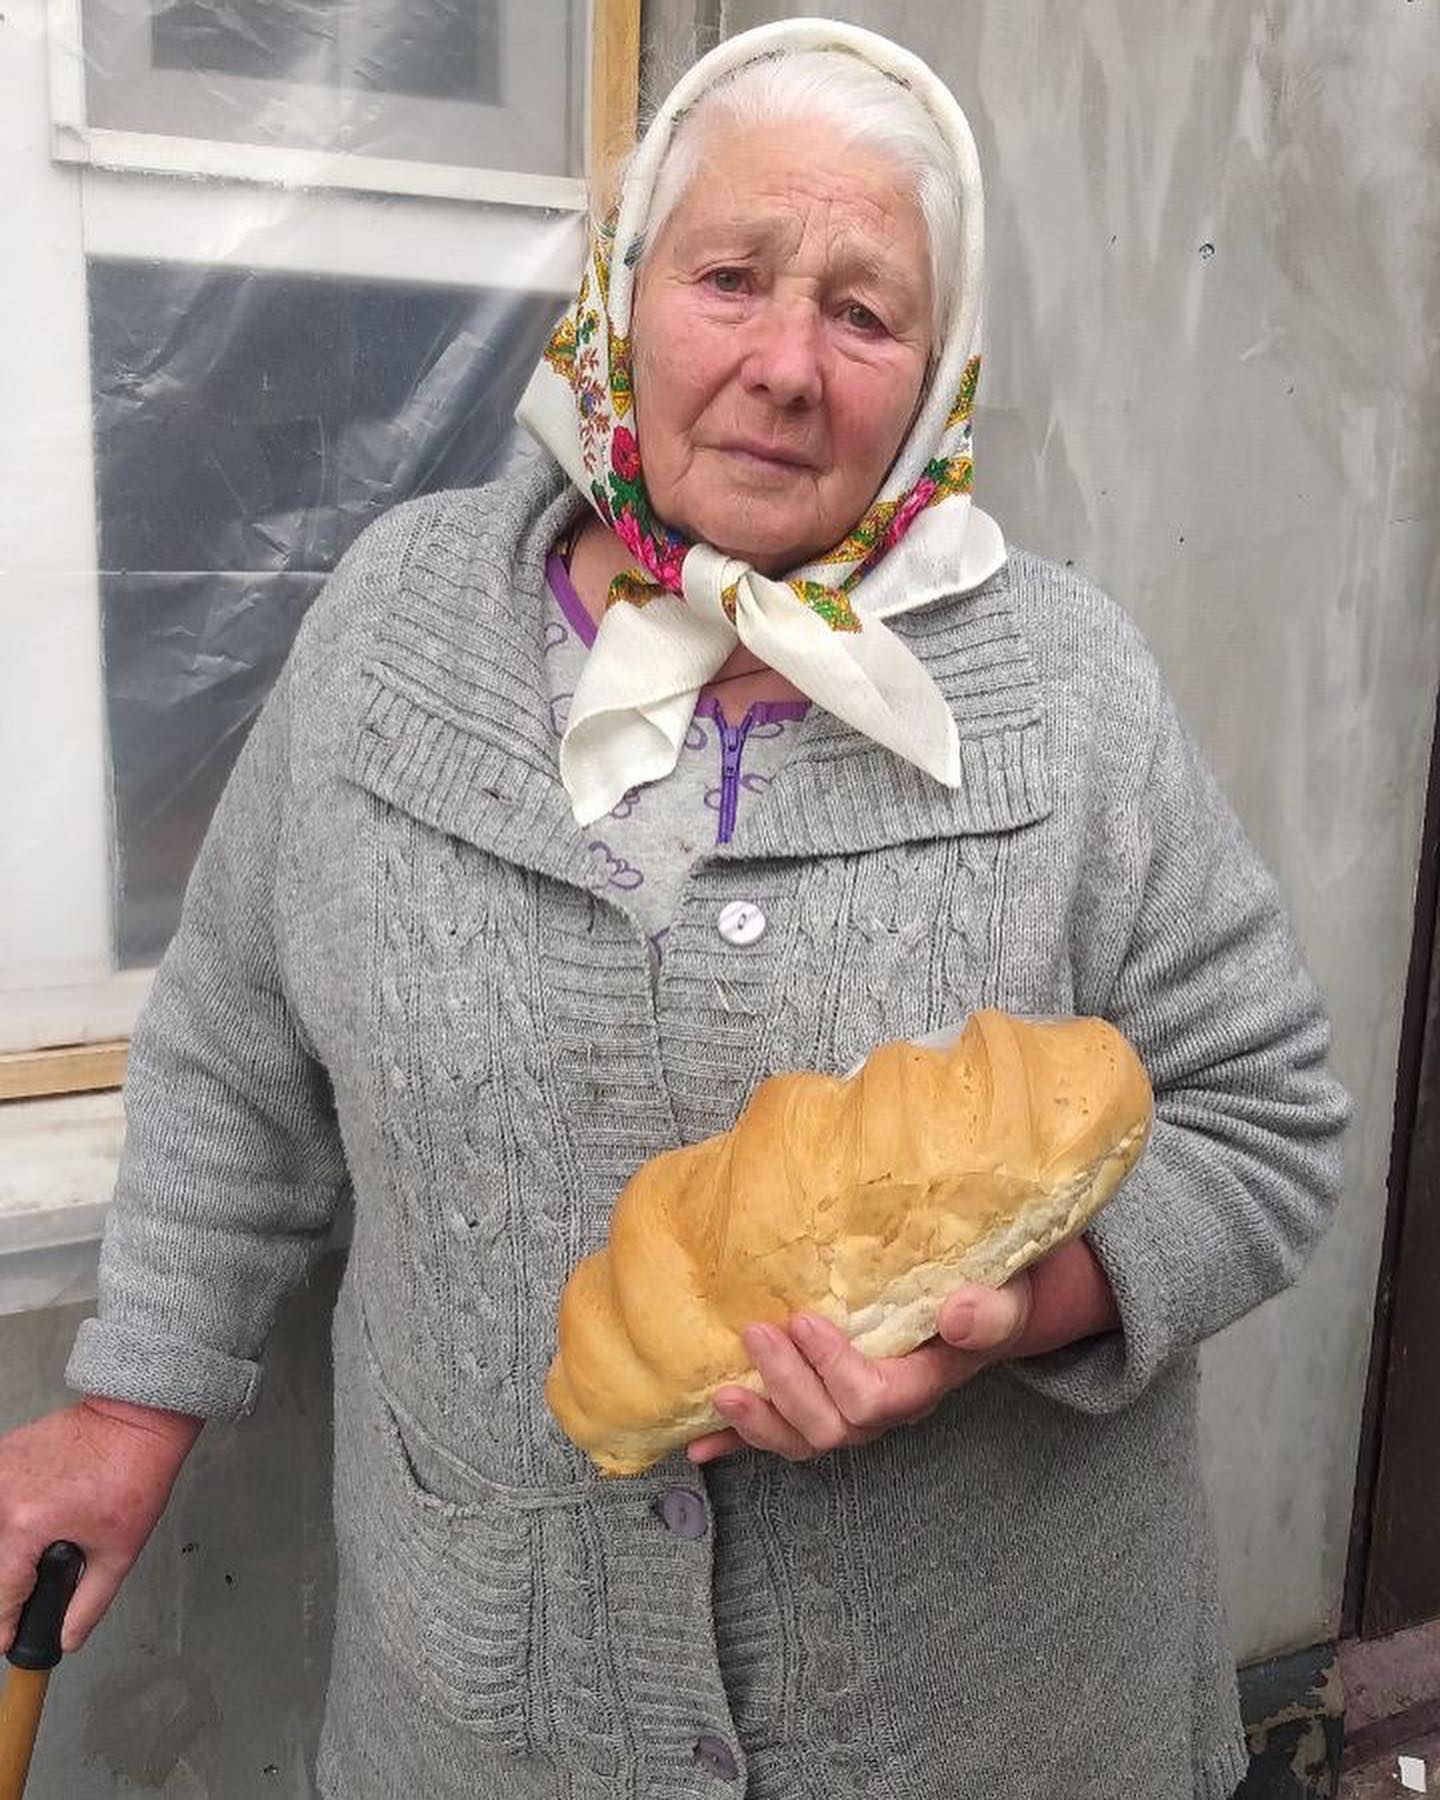 a woman holding a loaf of bread in her hands.